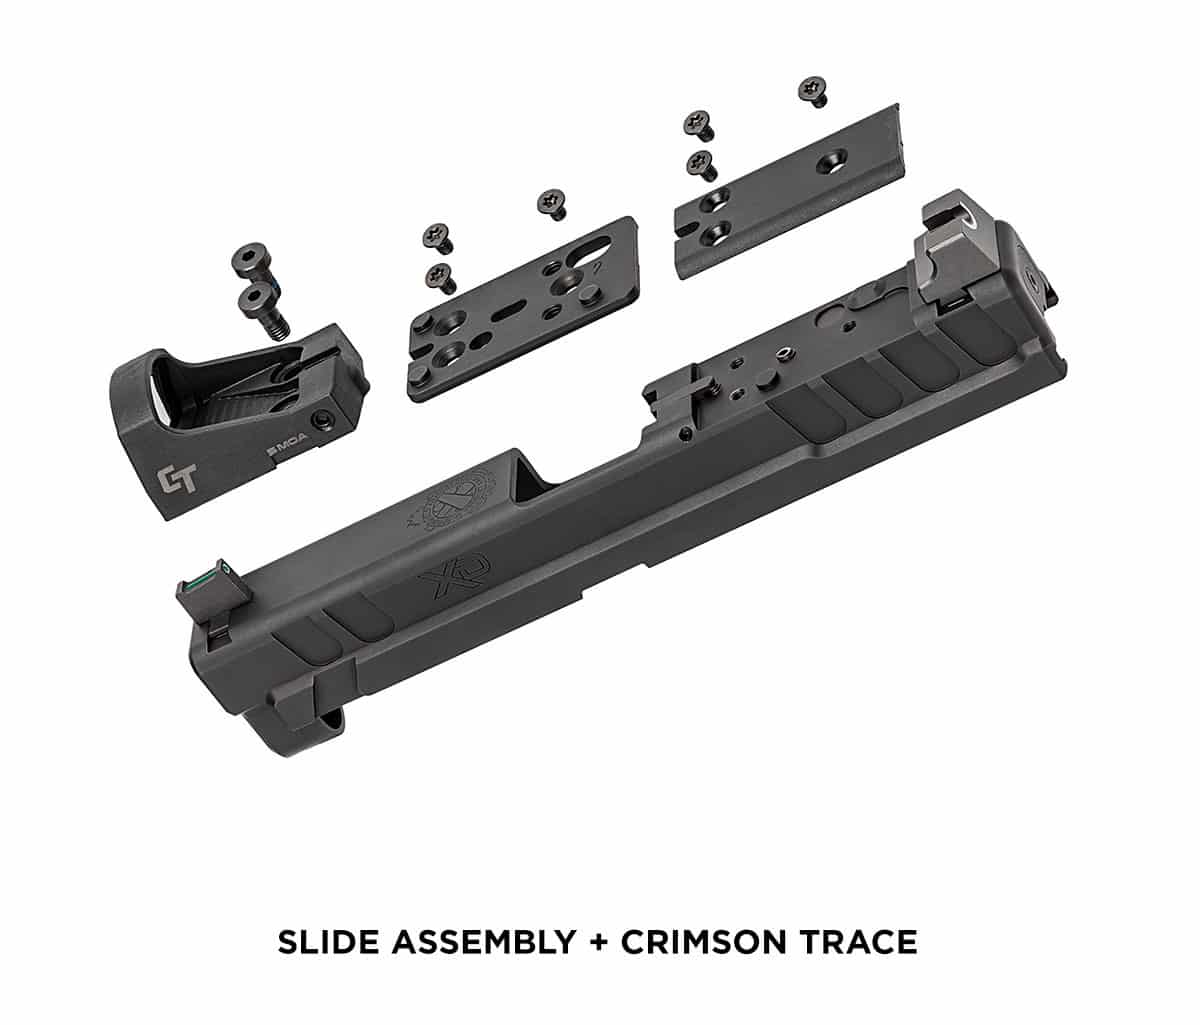 Slide Assembly with CT